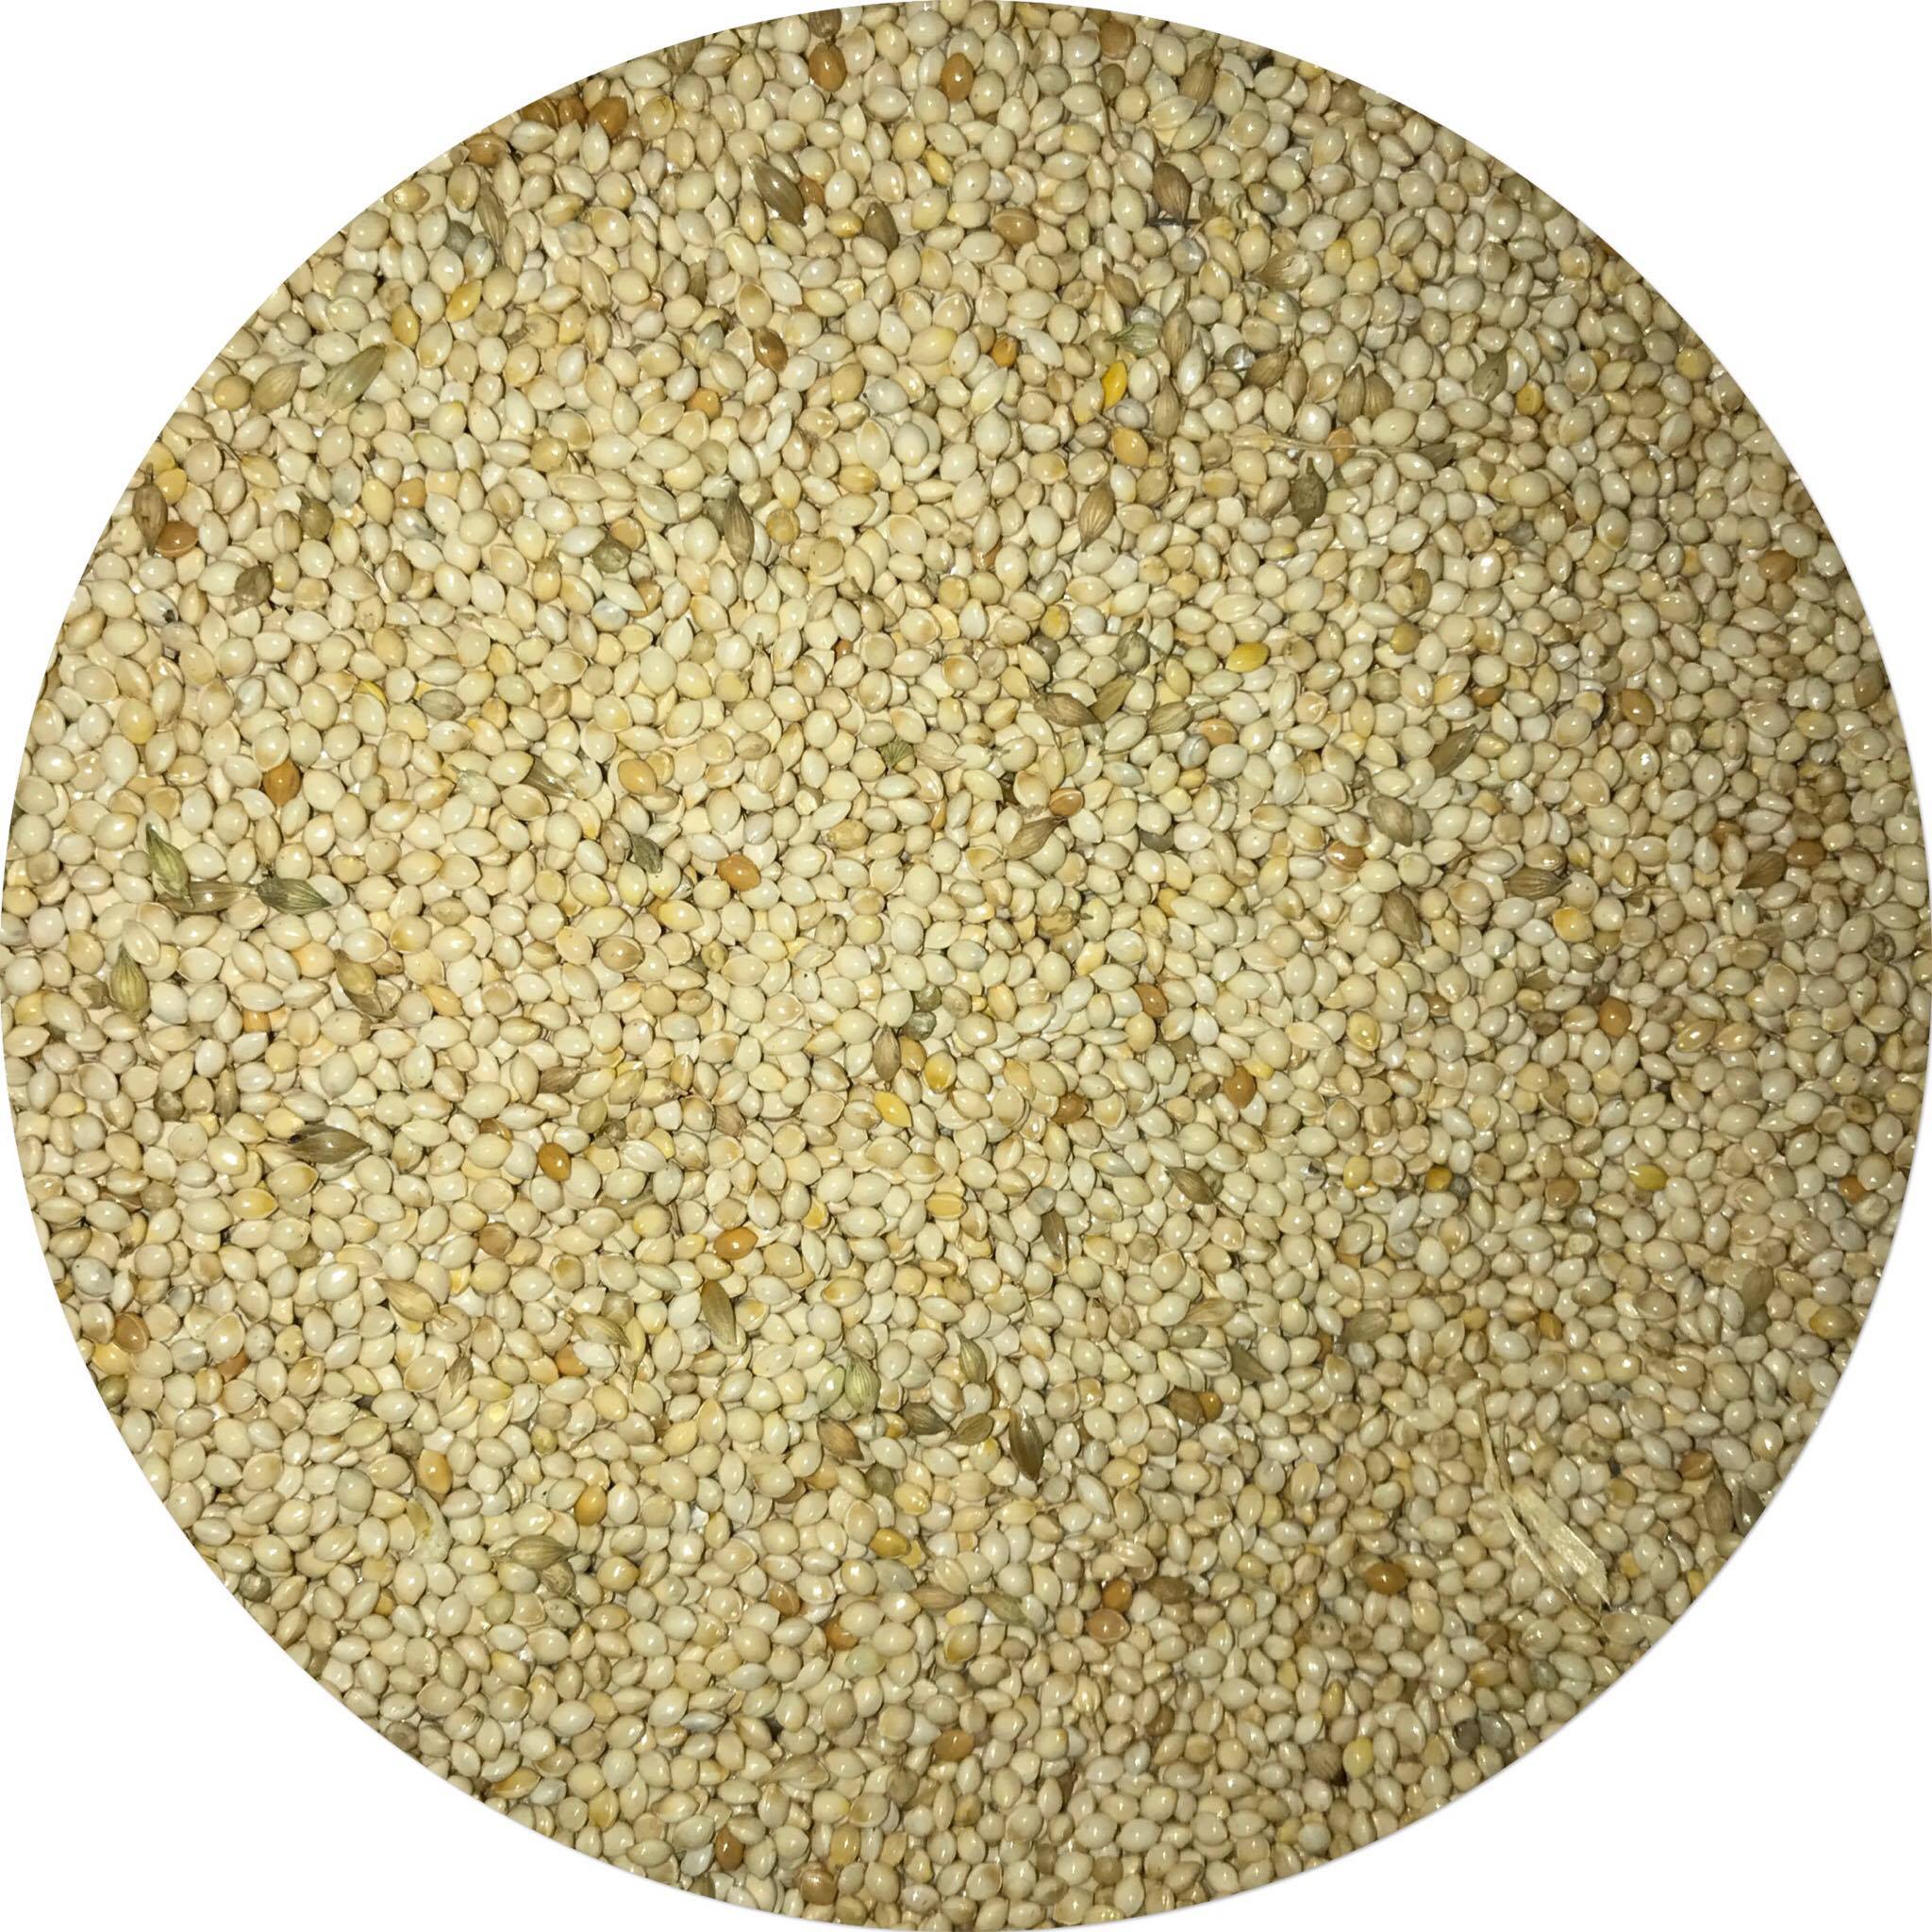 White French Millet – Coopers Rural & Hardware.